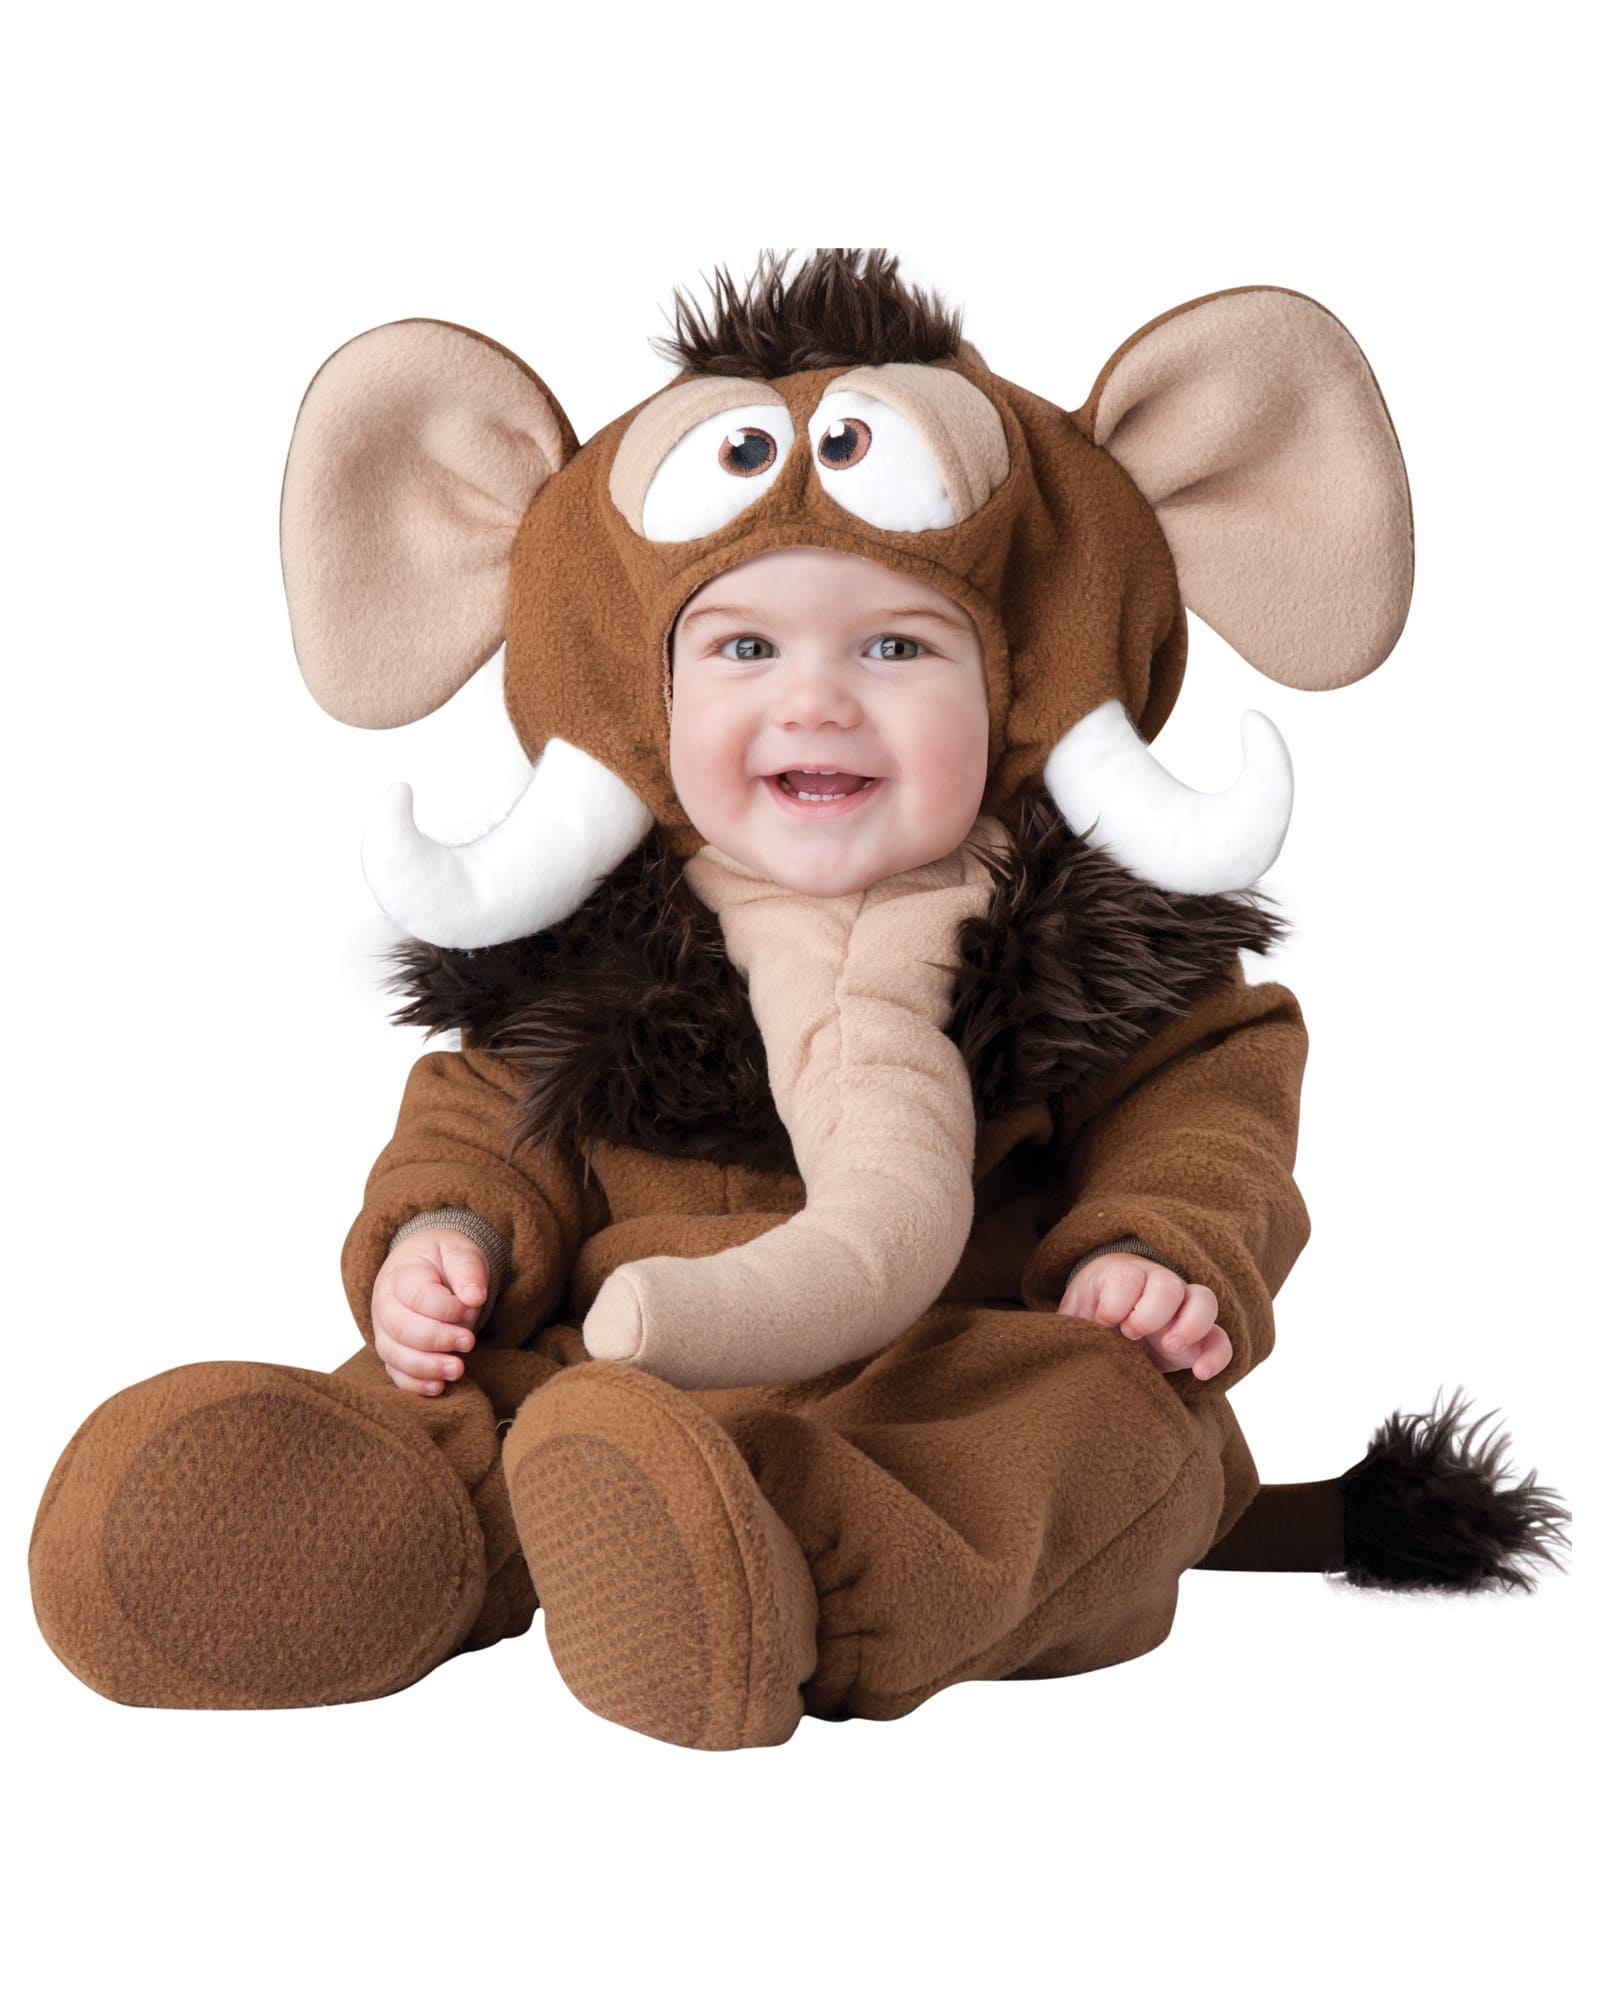 Hobbypos Wee Wooly Mammoth Elephant Prehistoric Toddler Boys Costume